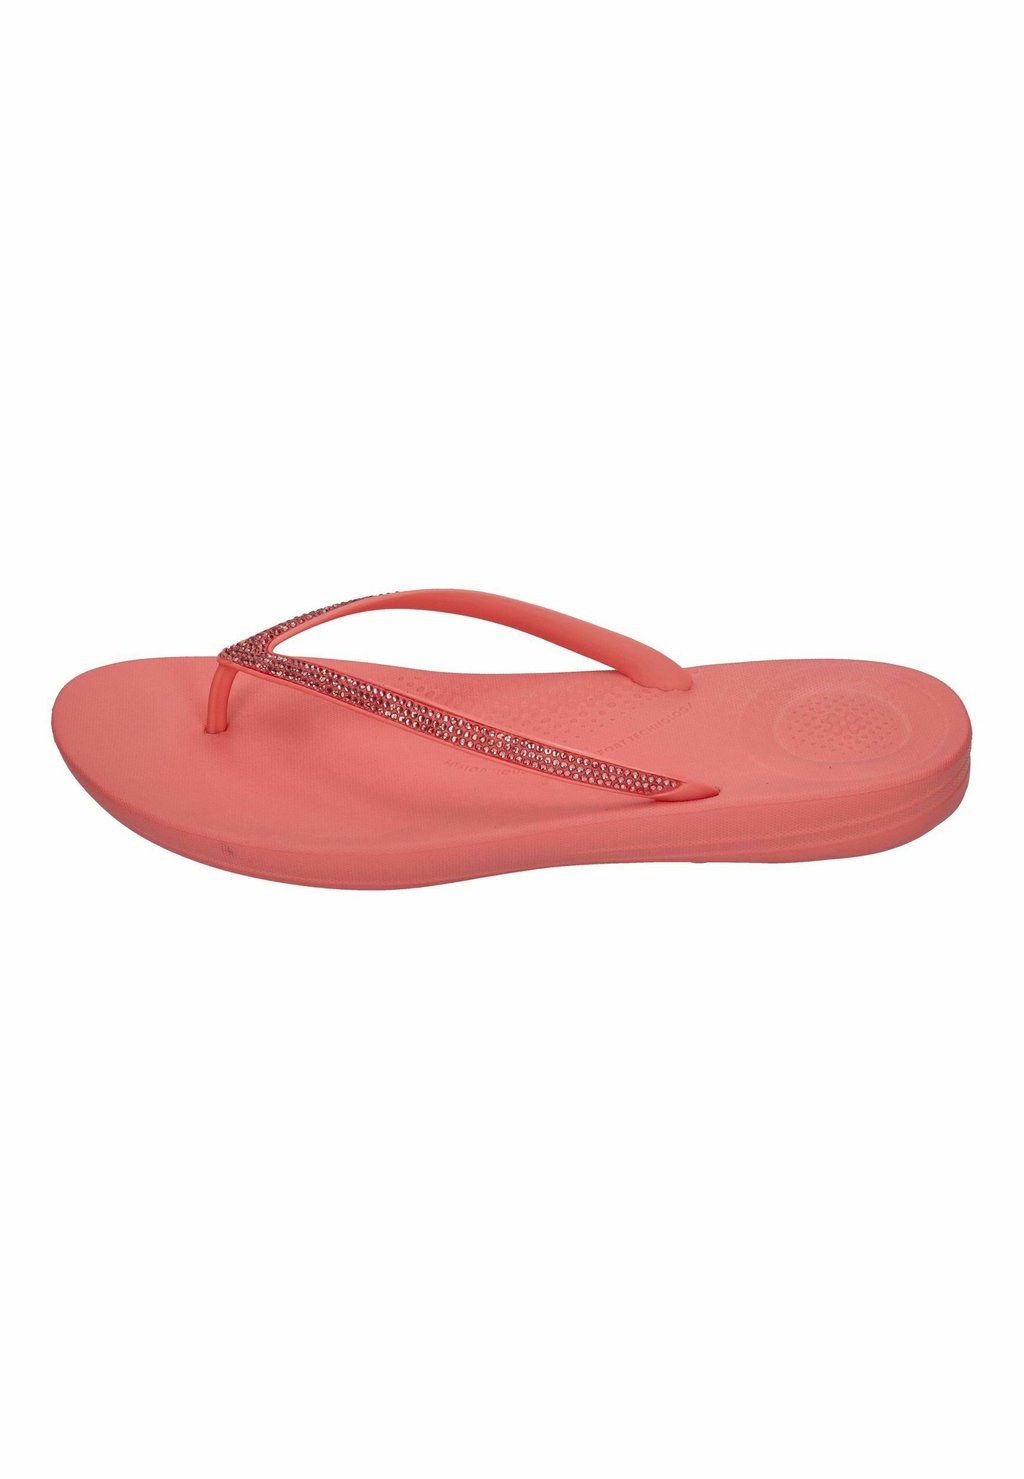 Сандалии ZEHENTRENNER IQUSHION SPARKLE R08 FitFlop, цвет rosy coral rosy romance box